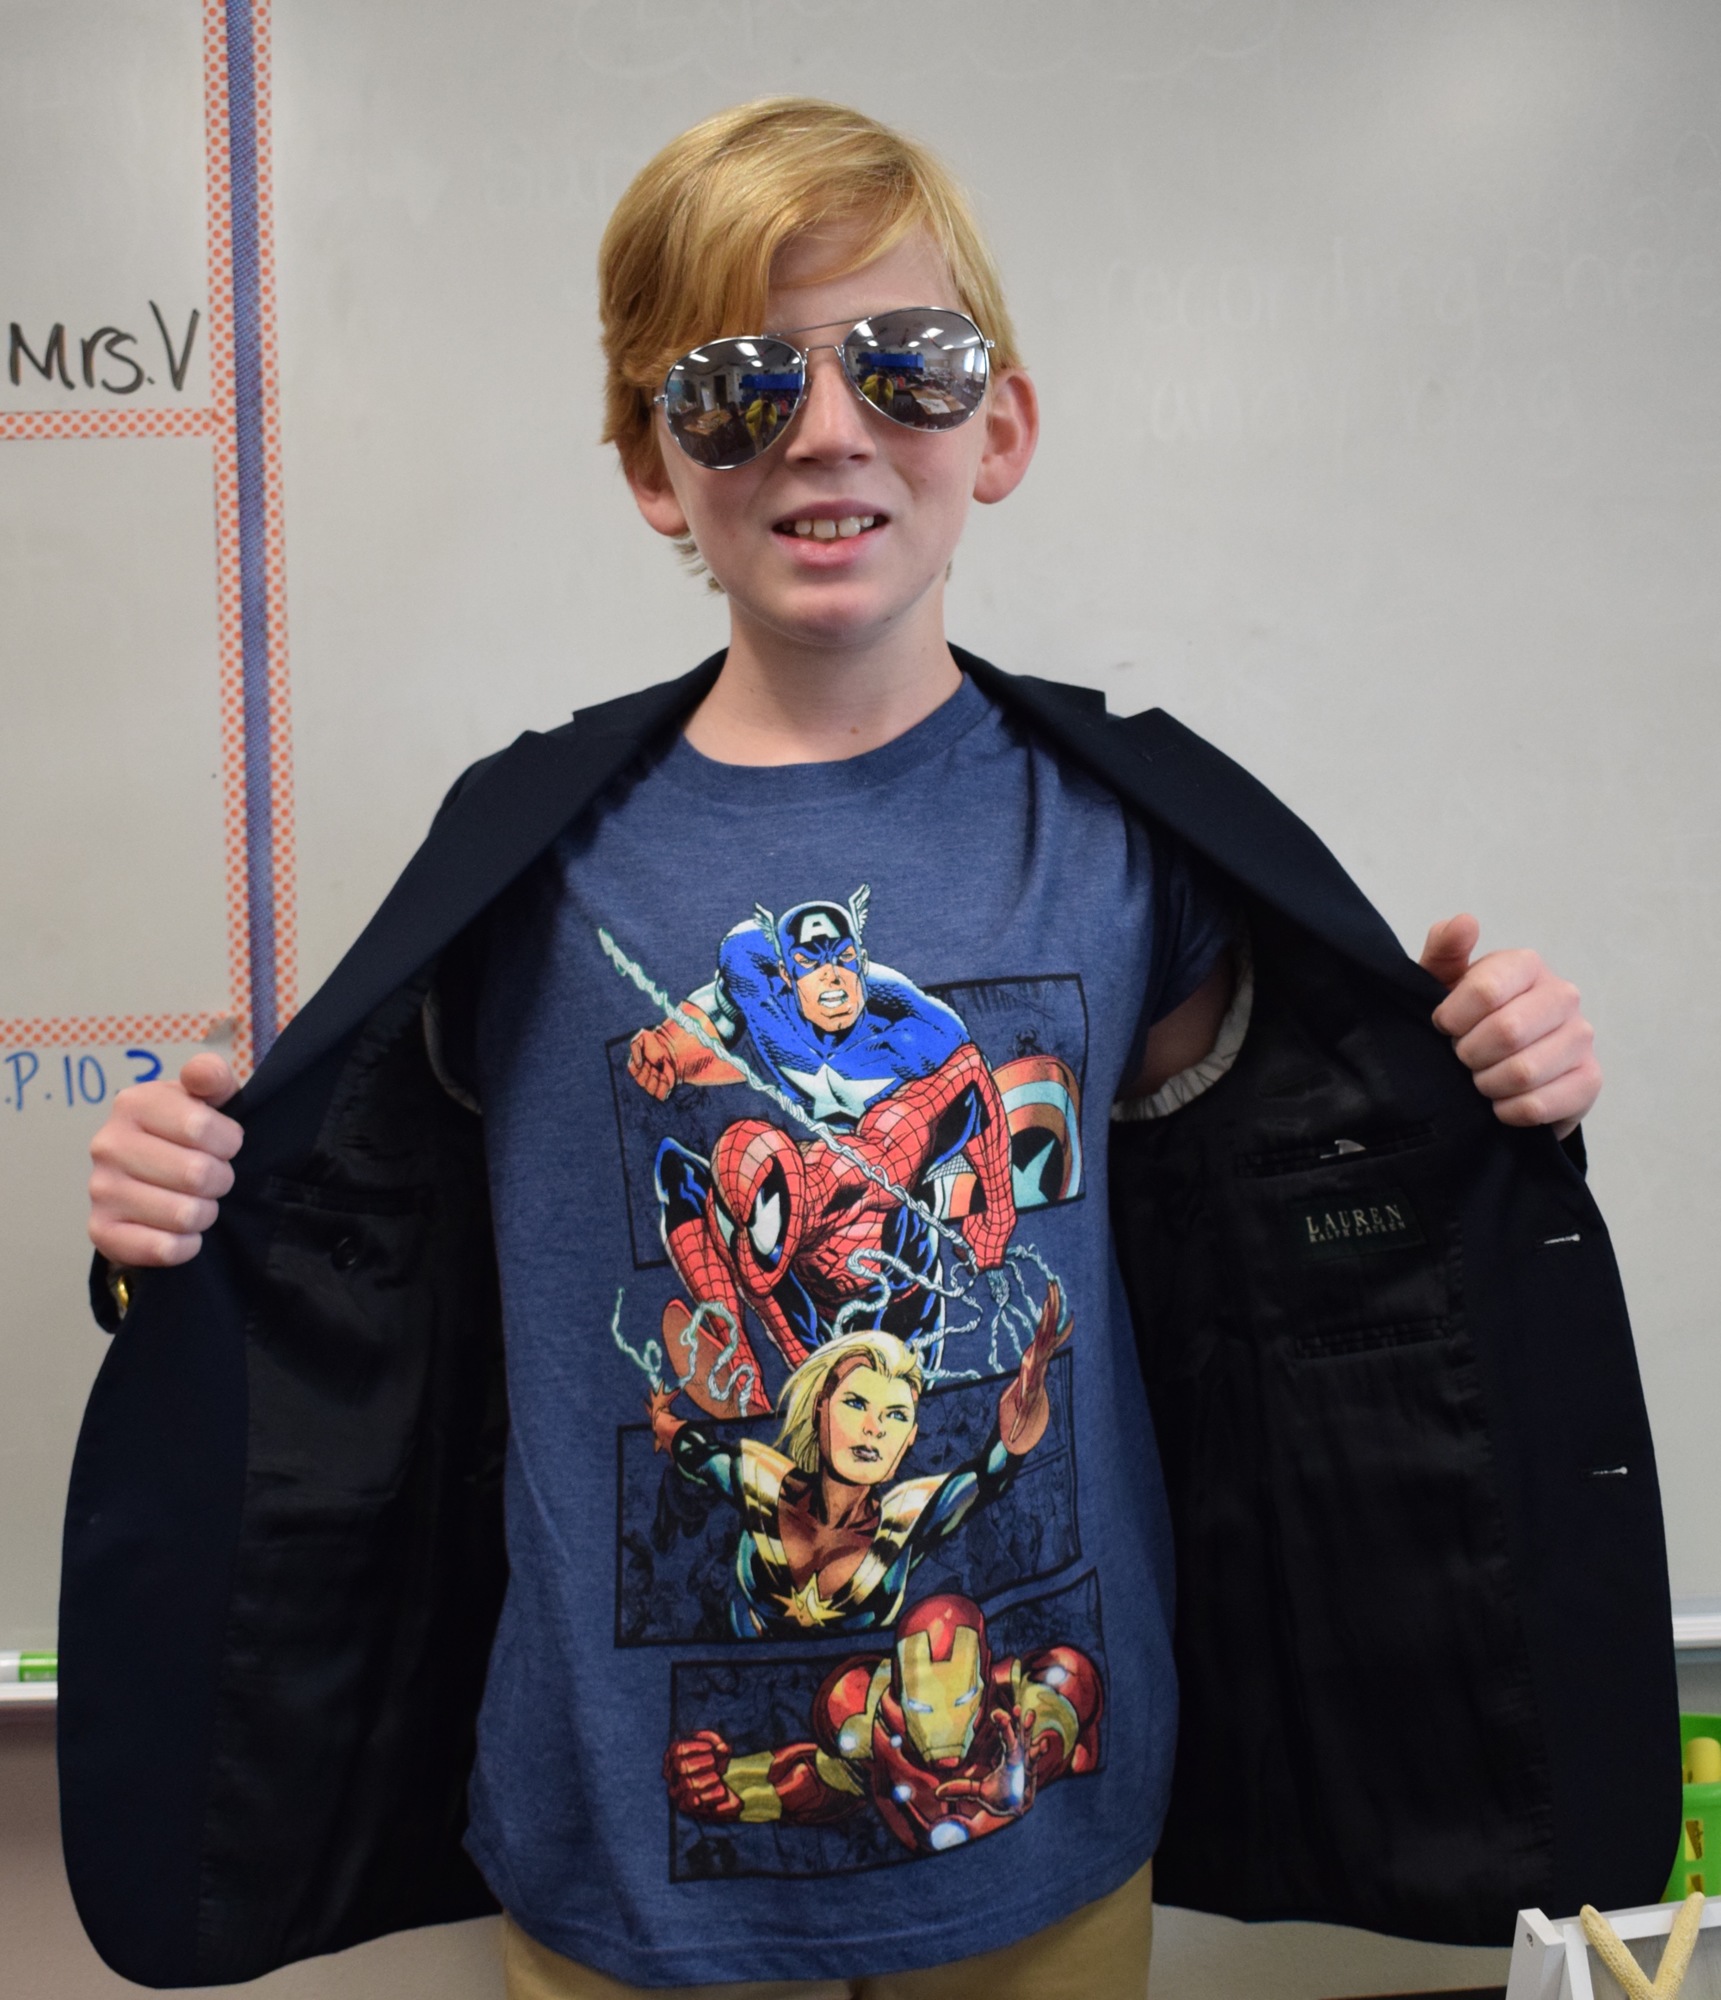 Logan Traeger dressed as Stan Lee because of his love for the superheroes Lee created.